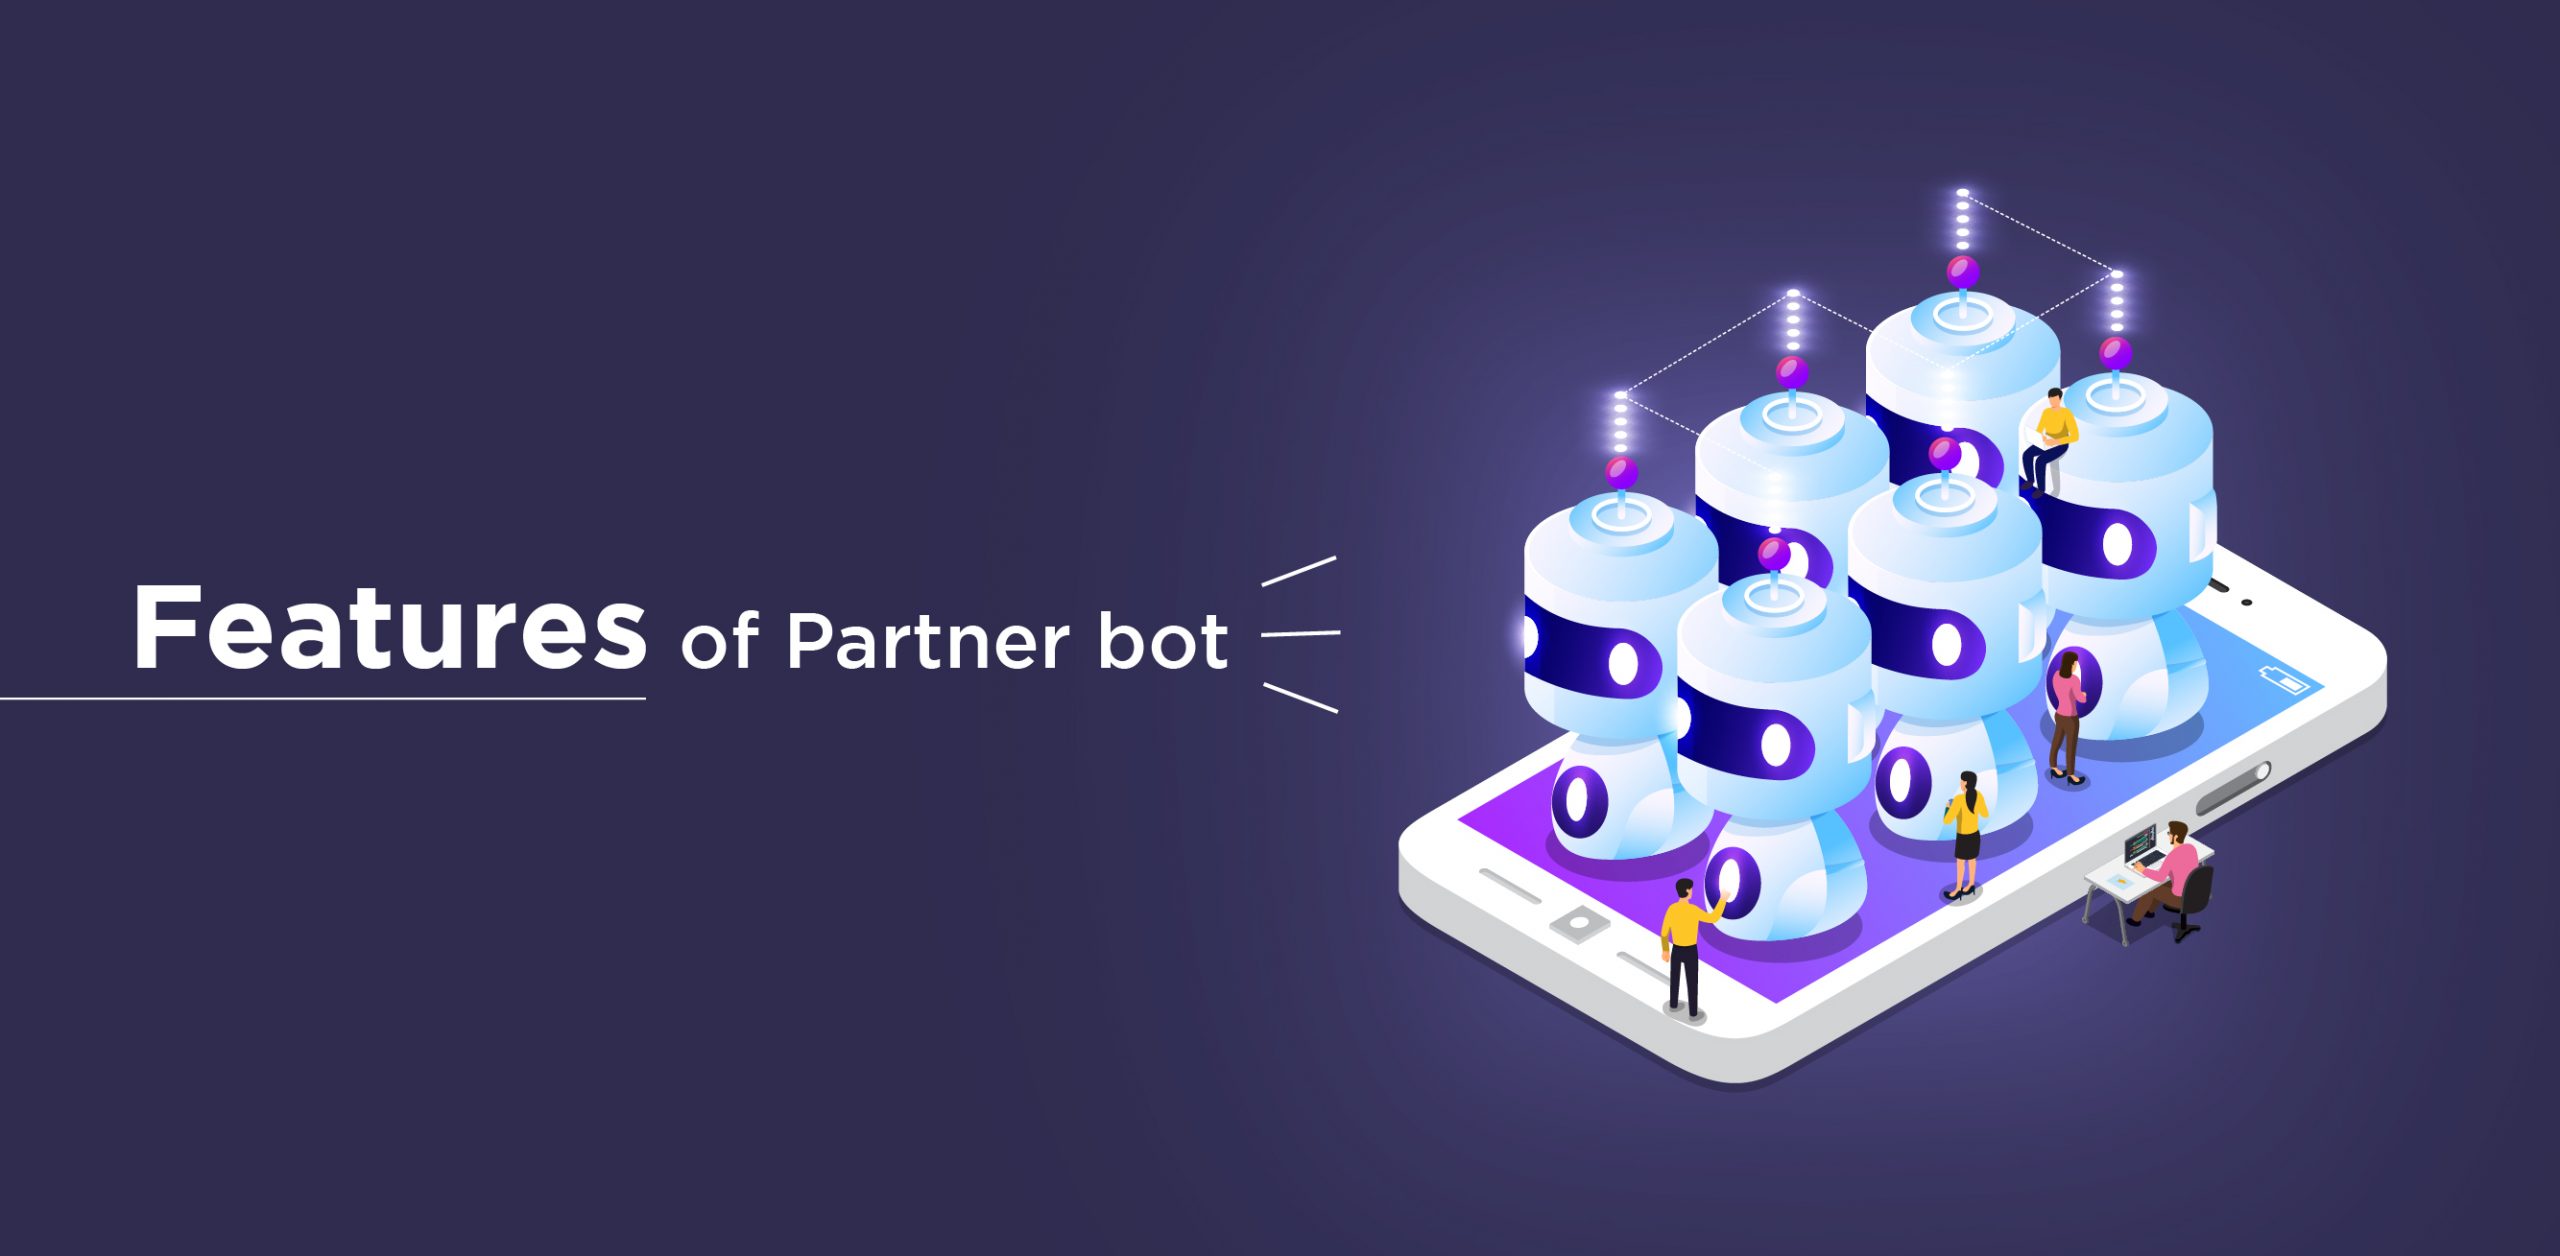 Features of Partner bot. 